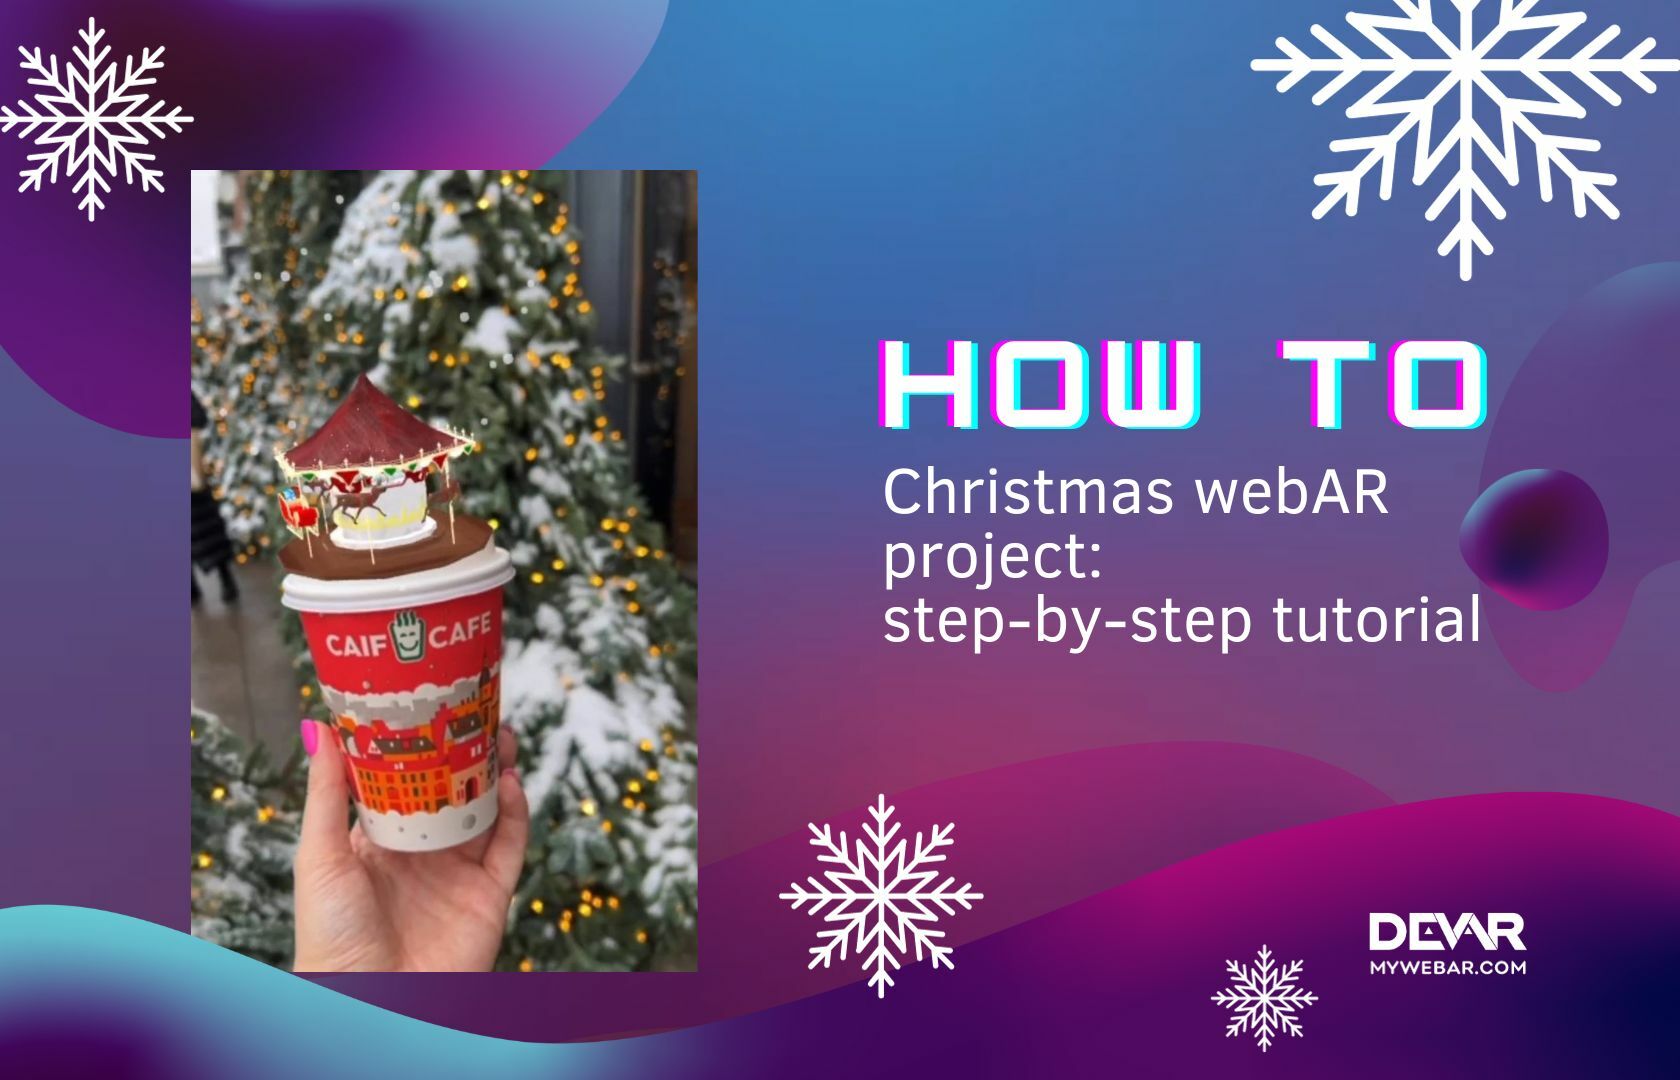 HOW TO: Christmas webAR project – step-by-step tutorial